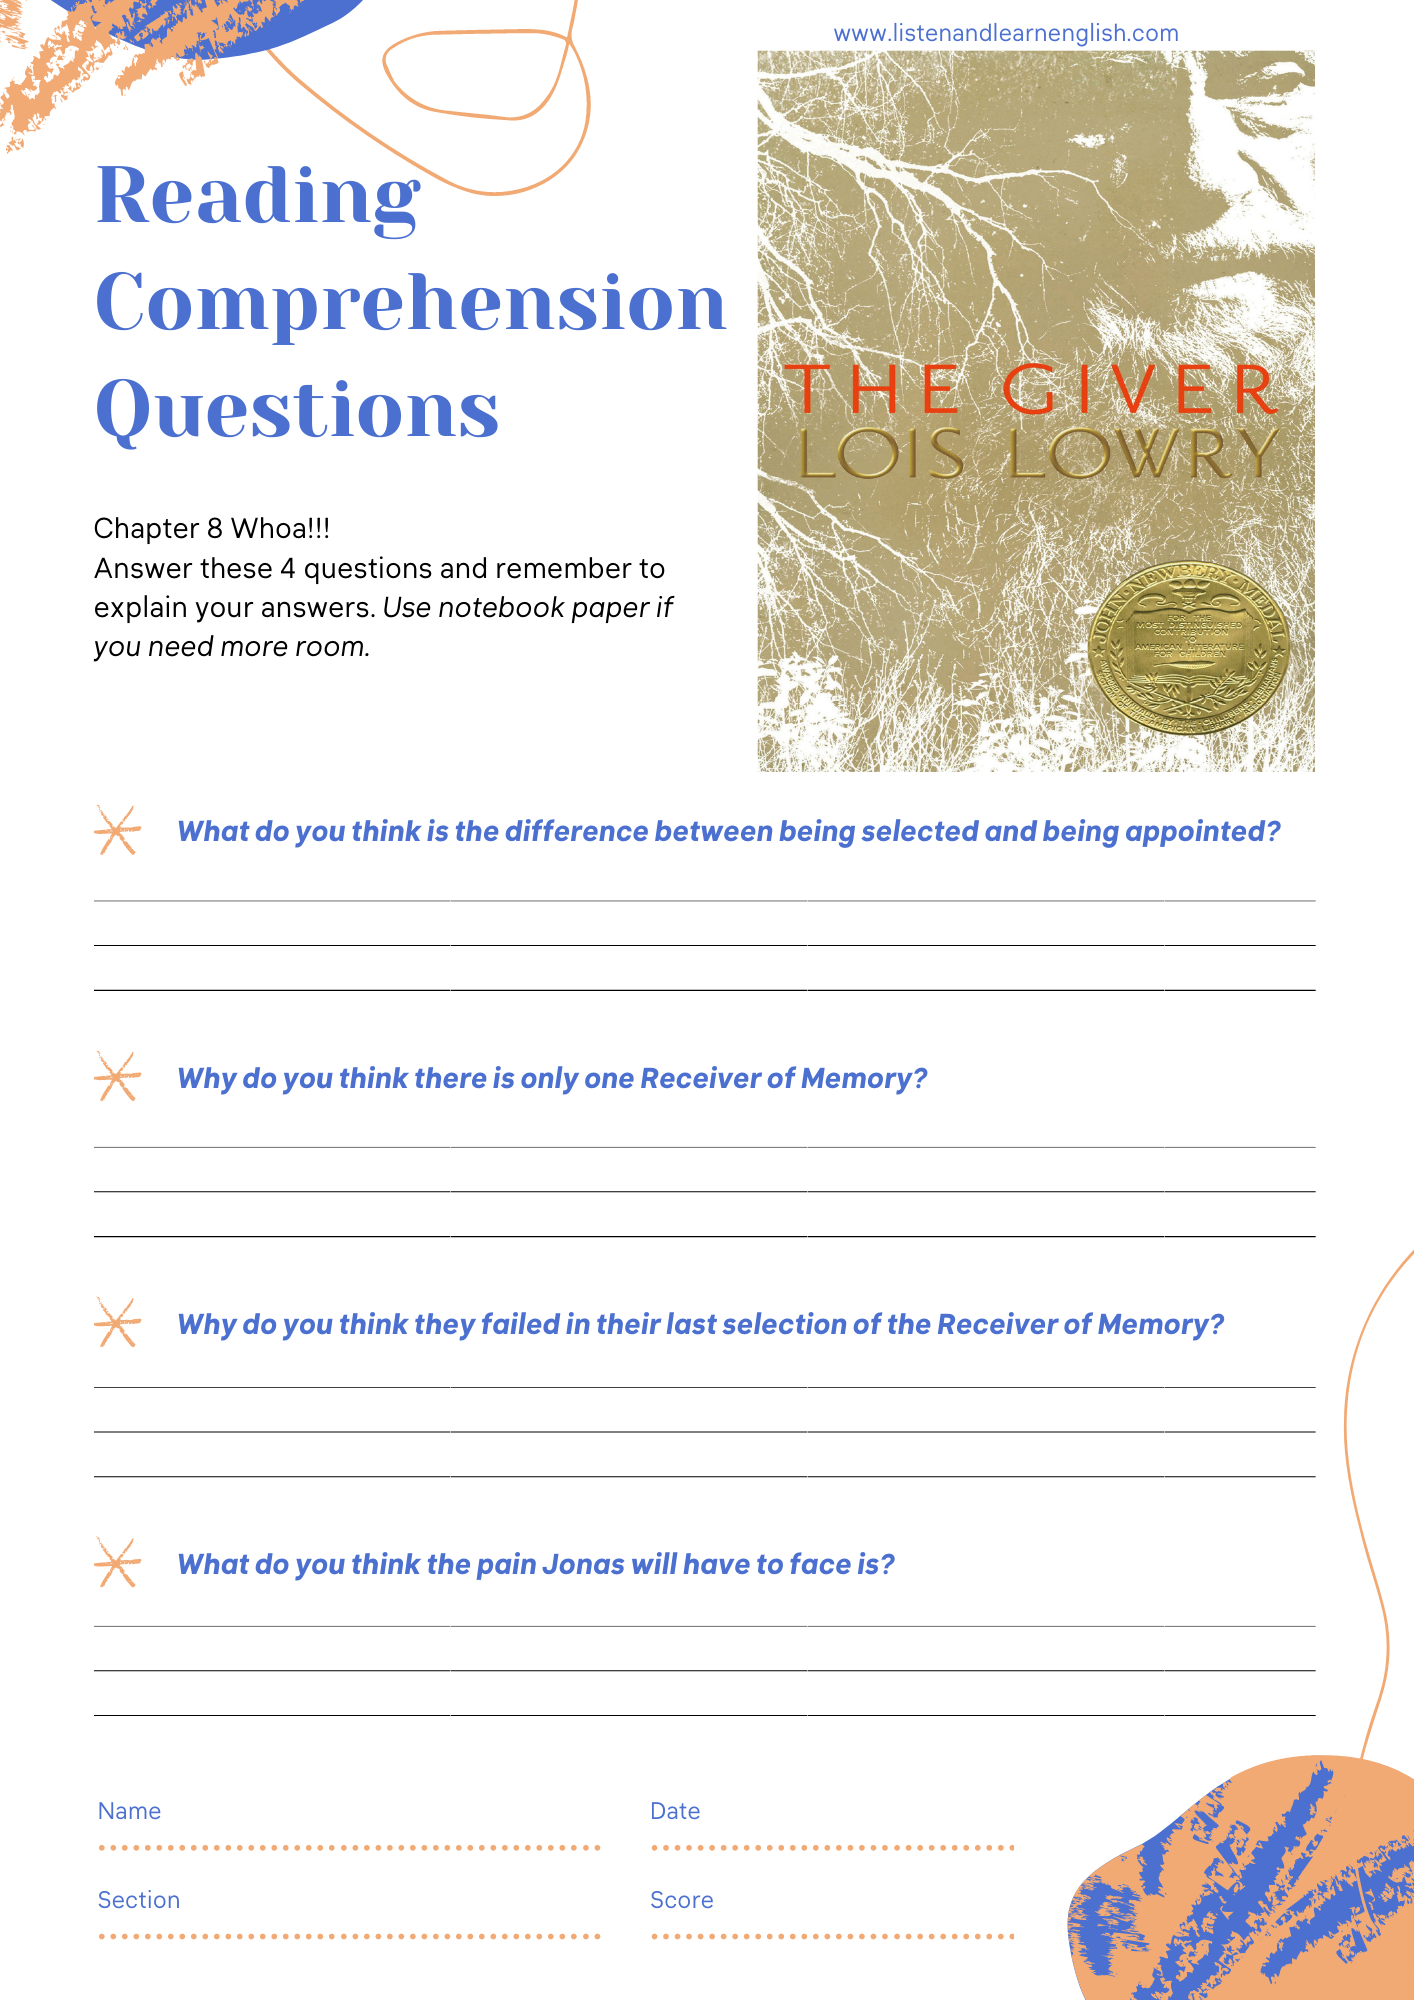 The Giver Chapter 8 Reading Comprehension Video and Questions Worksheet